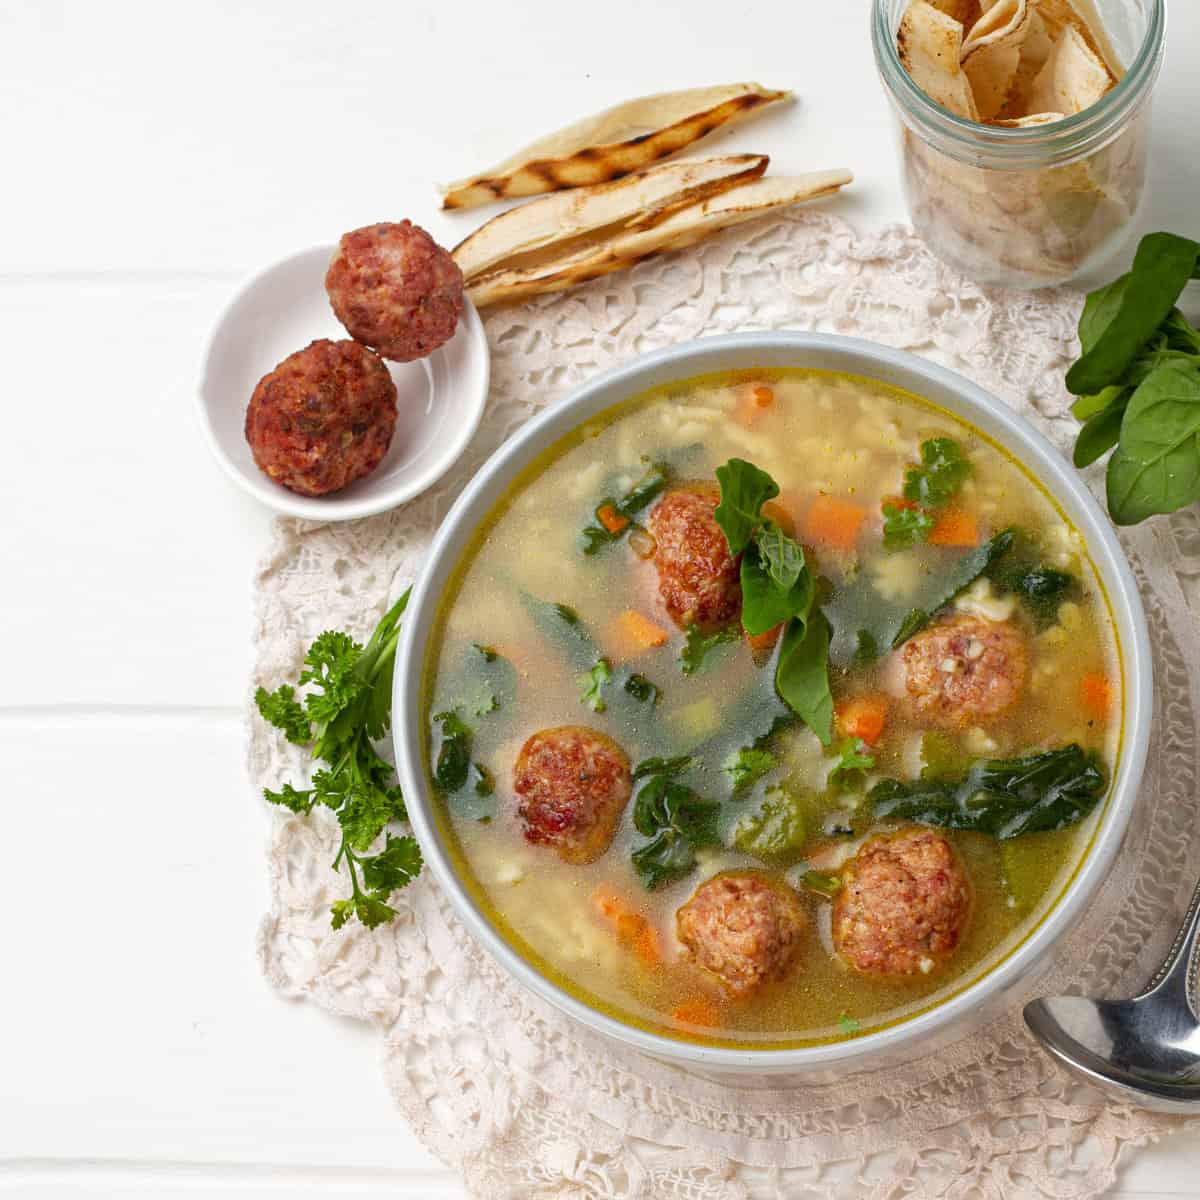 Italian Wedding Soup served in a bowl